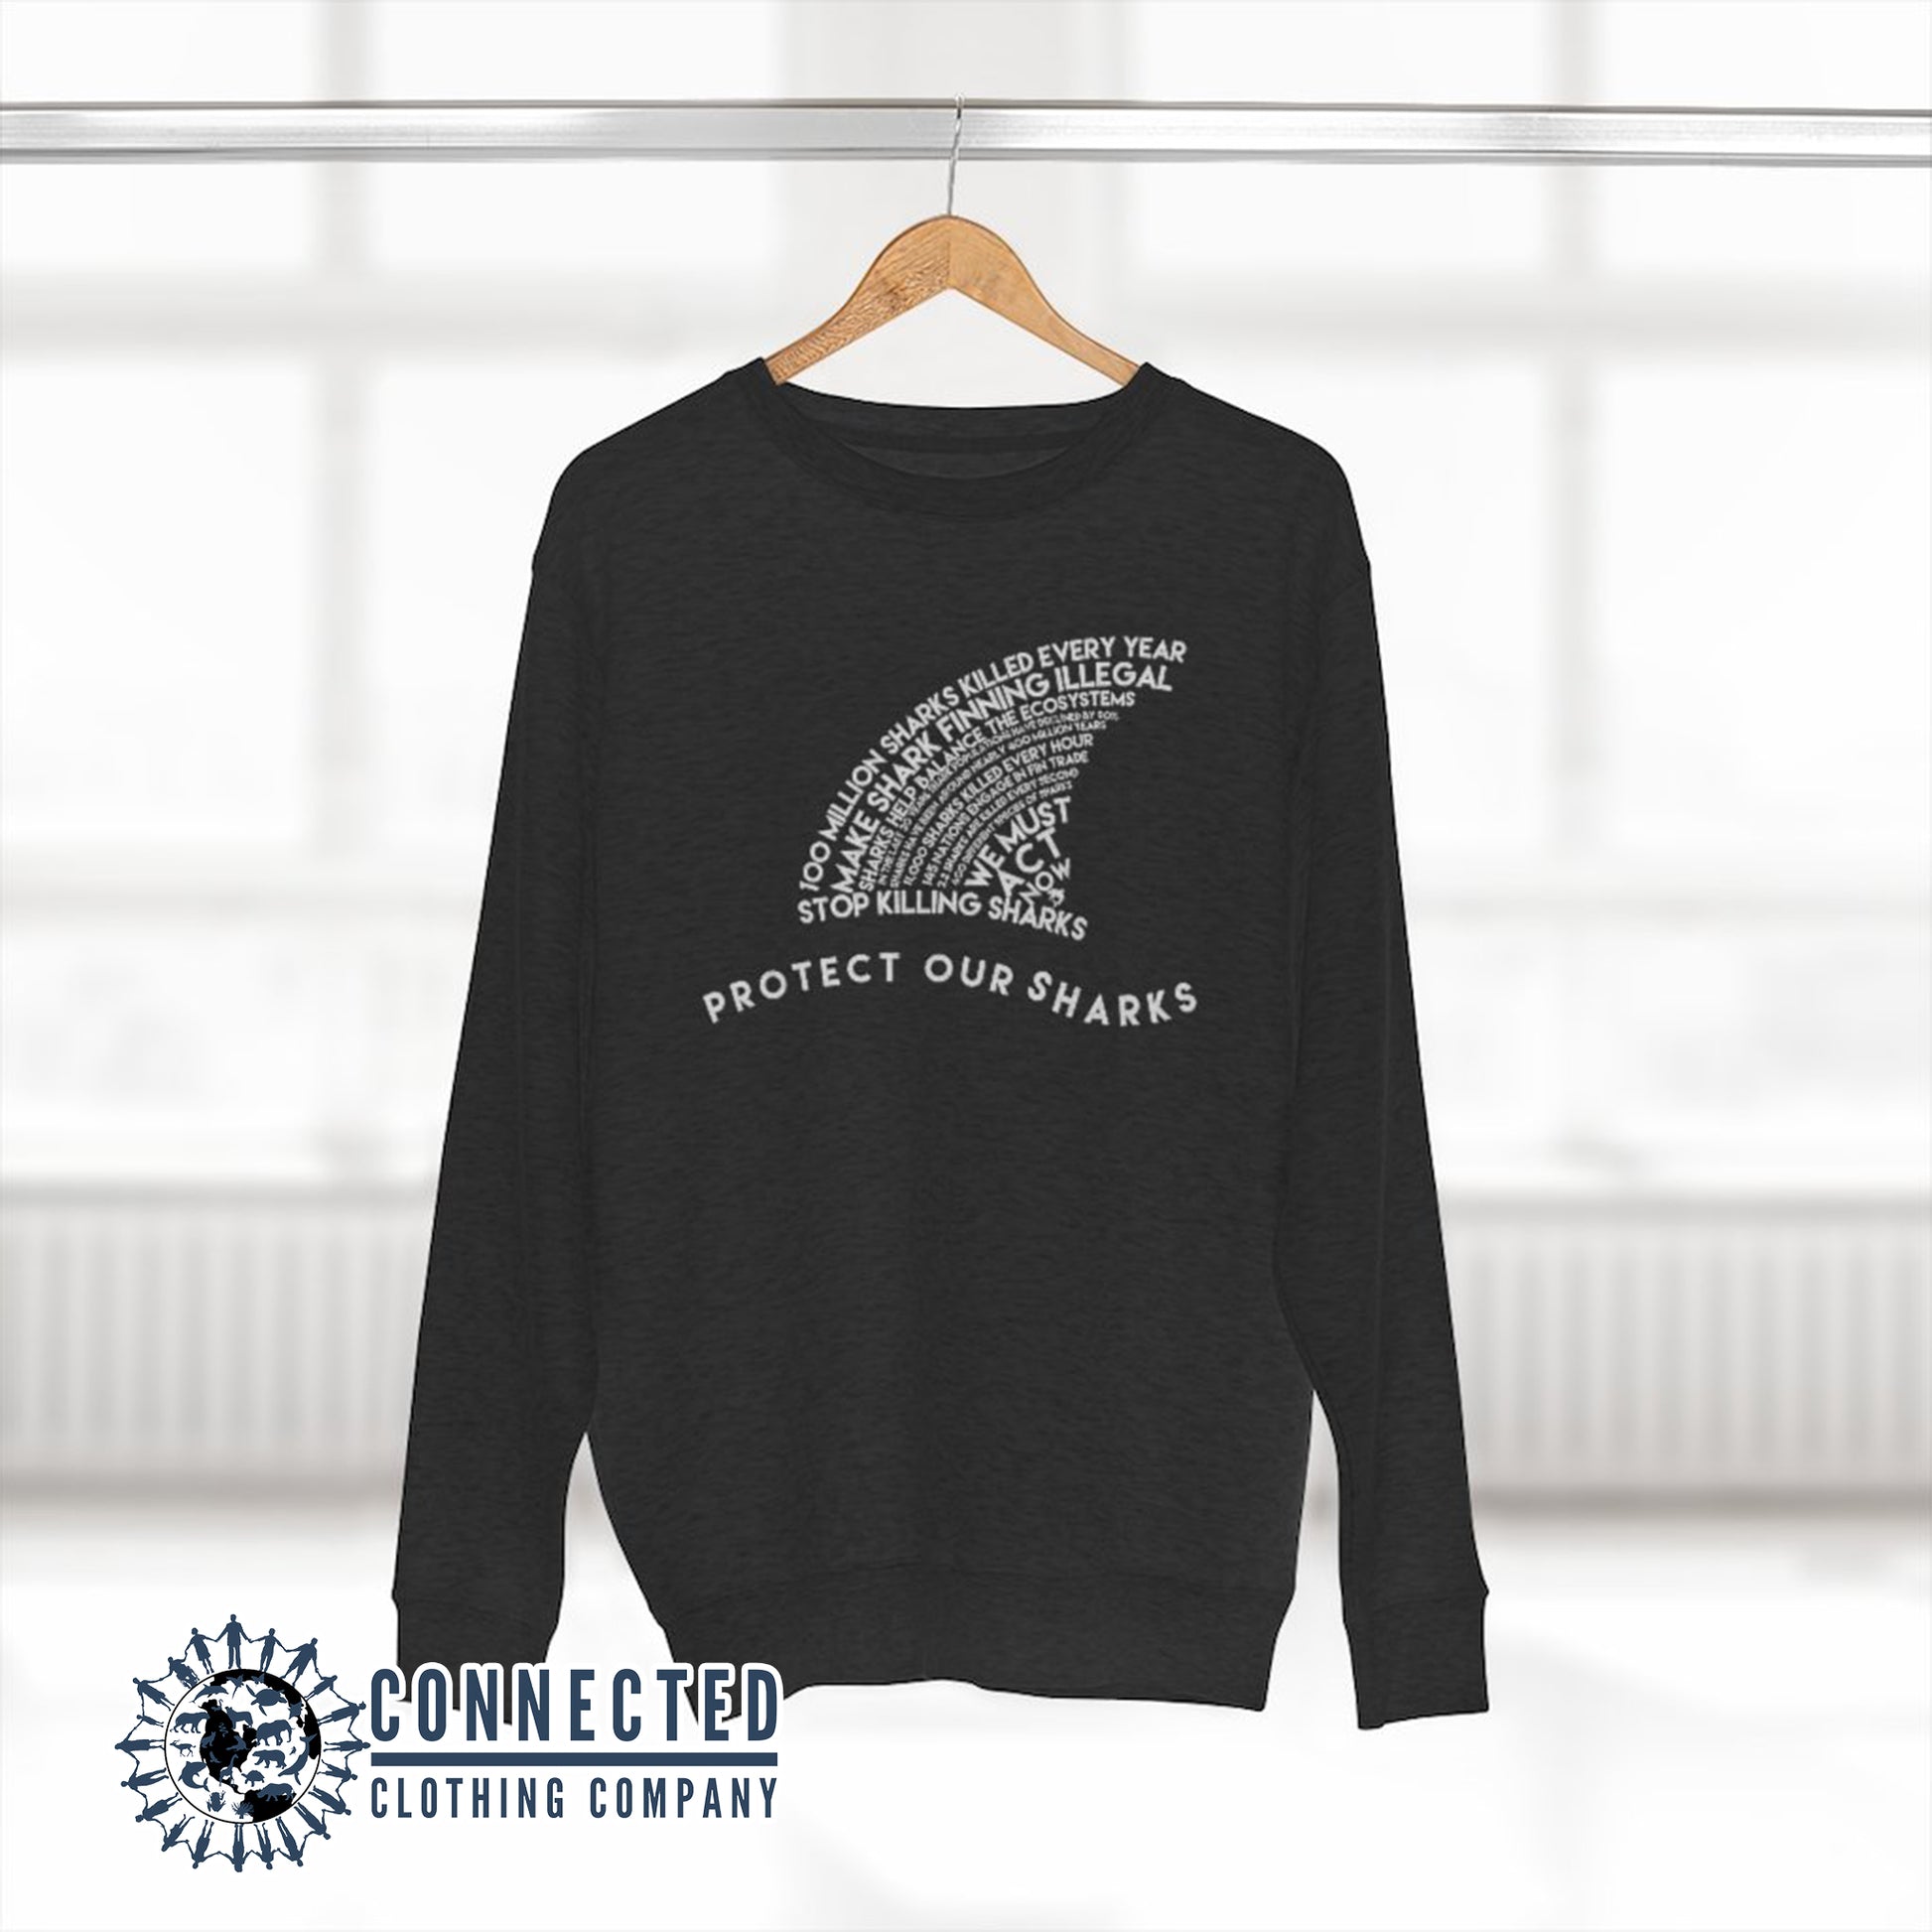 Charcoal Heather Protect Our Sharks Unisex Crewneck Sweatshirt - architectconstructor - Ethically and Sustainably Made - 10% of profits donated to shark conservation and ocean conservation